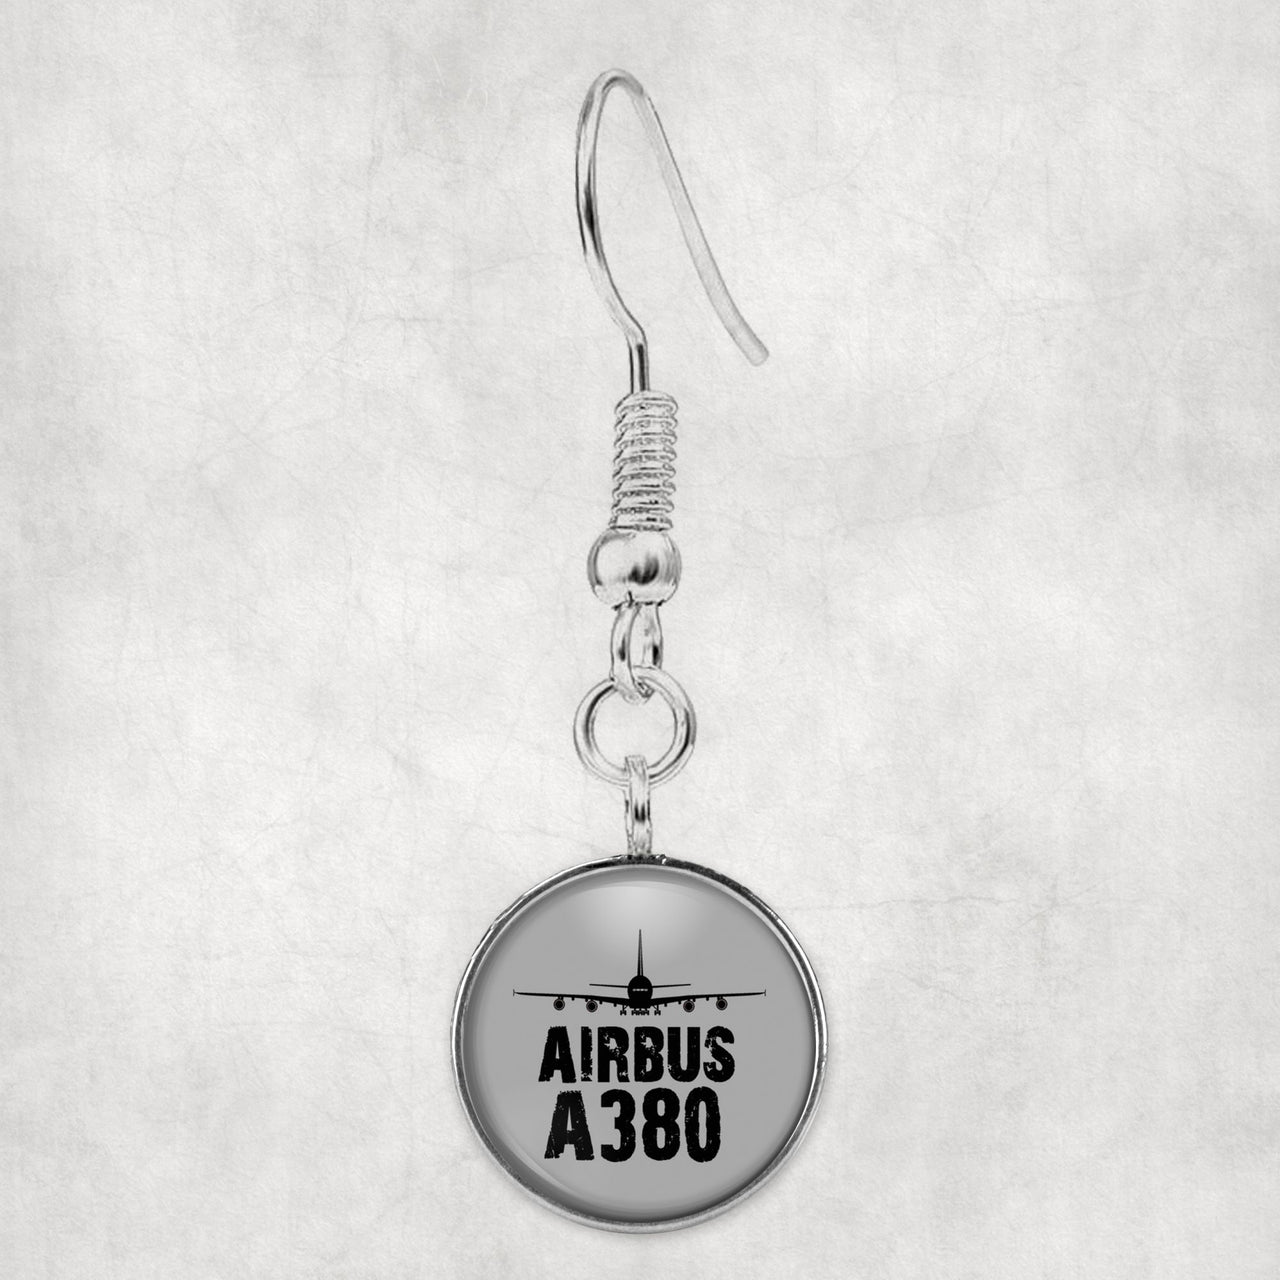 Airbus A380 & Plane Designed Earrings